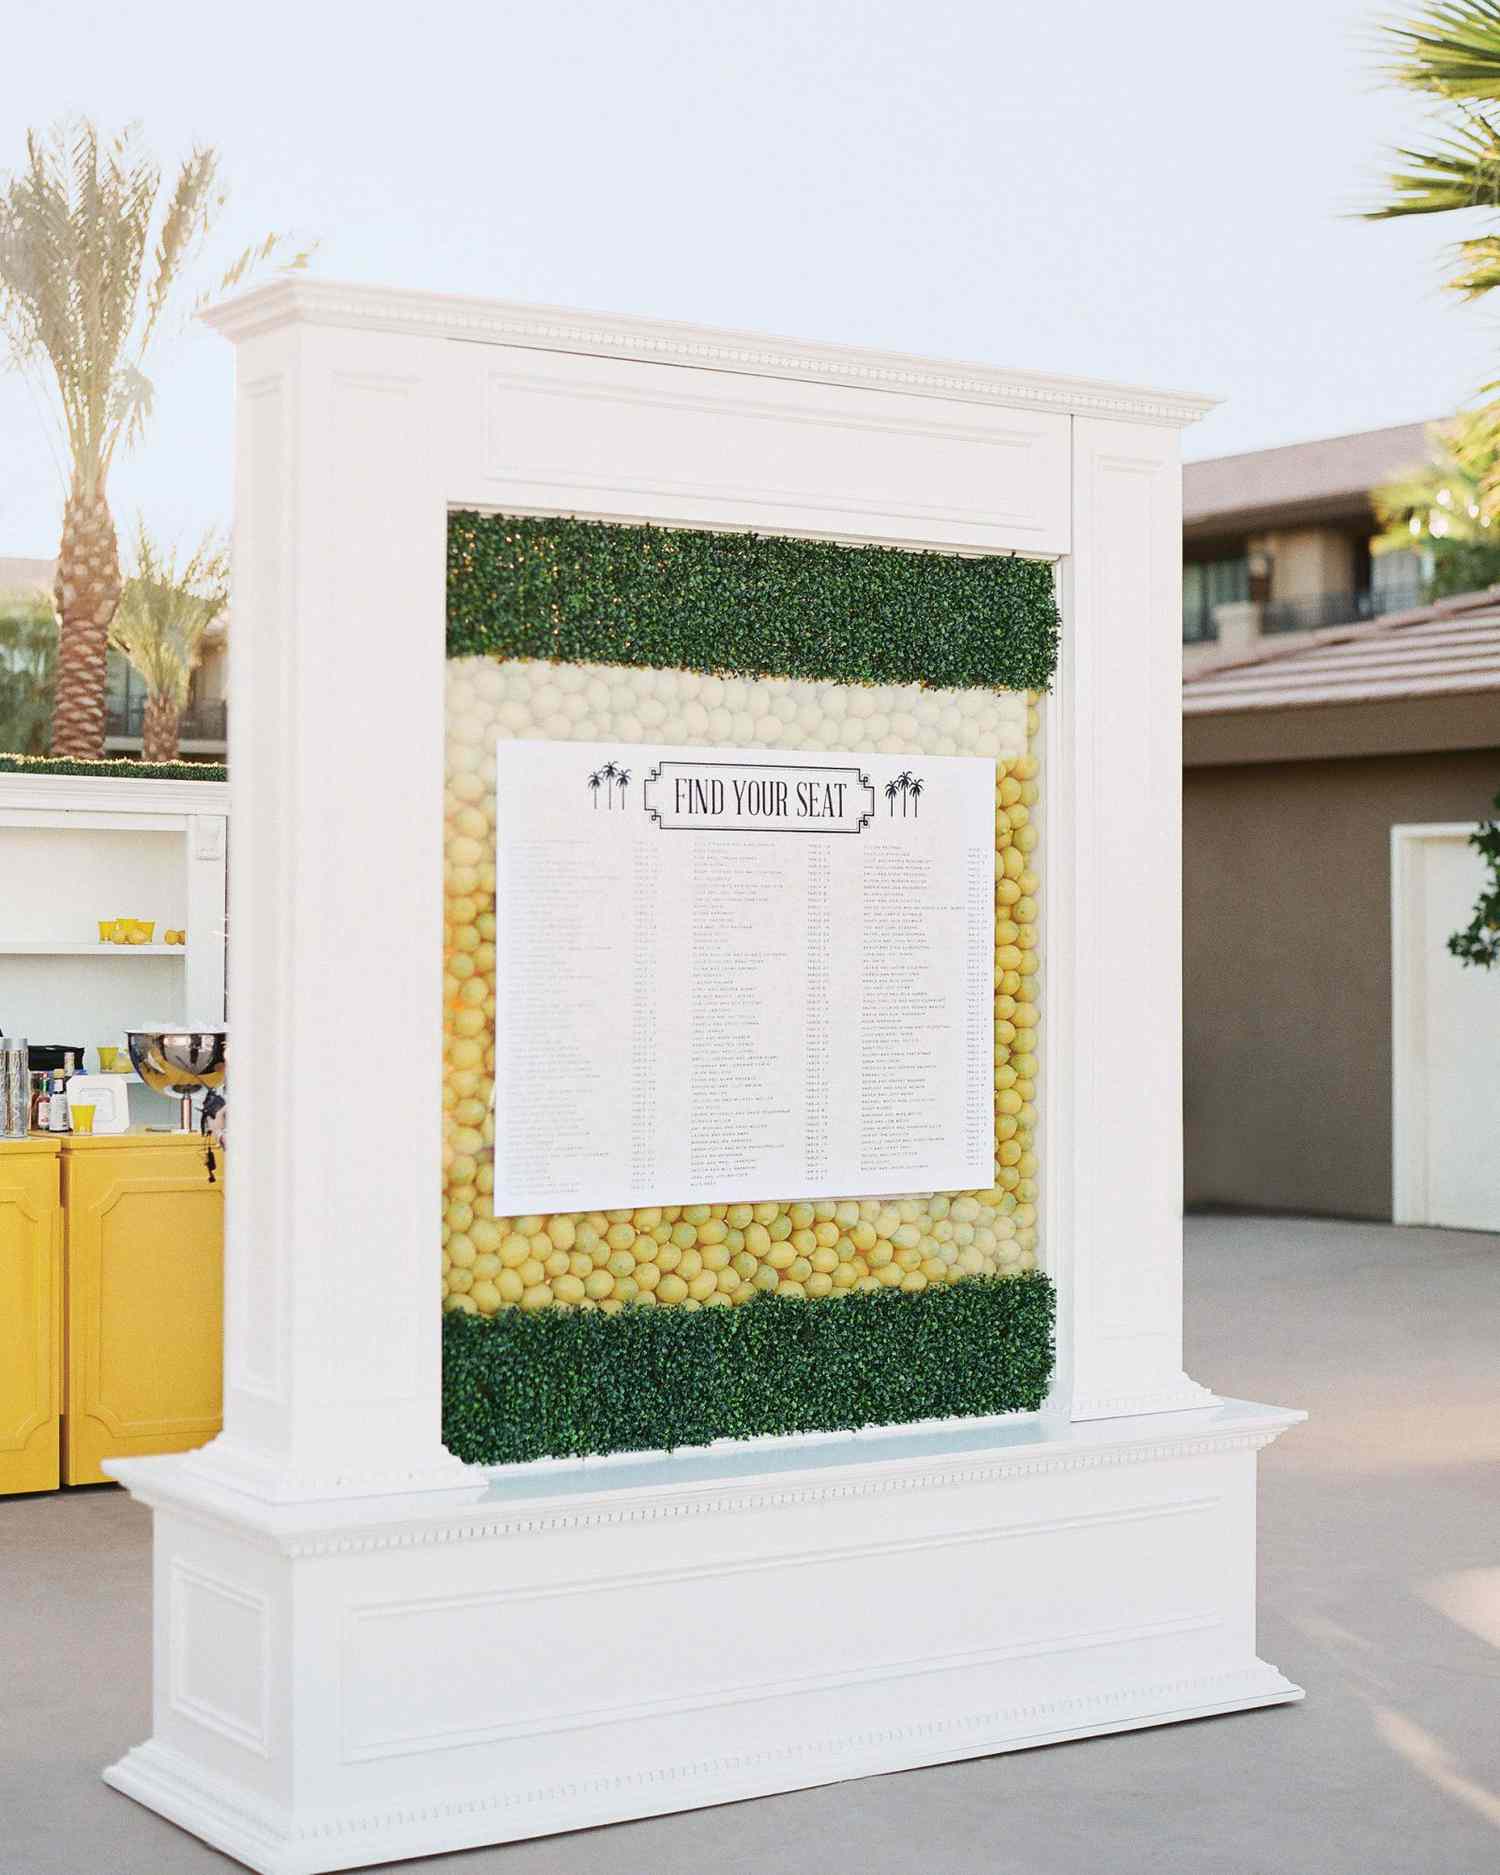 A Citrus-Filled Seating Display